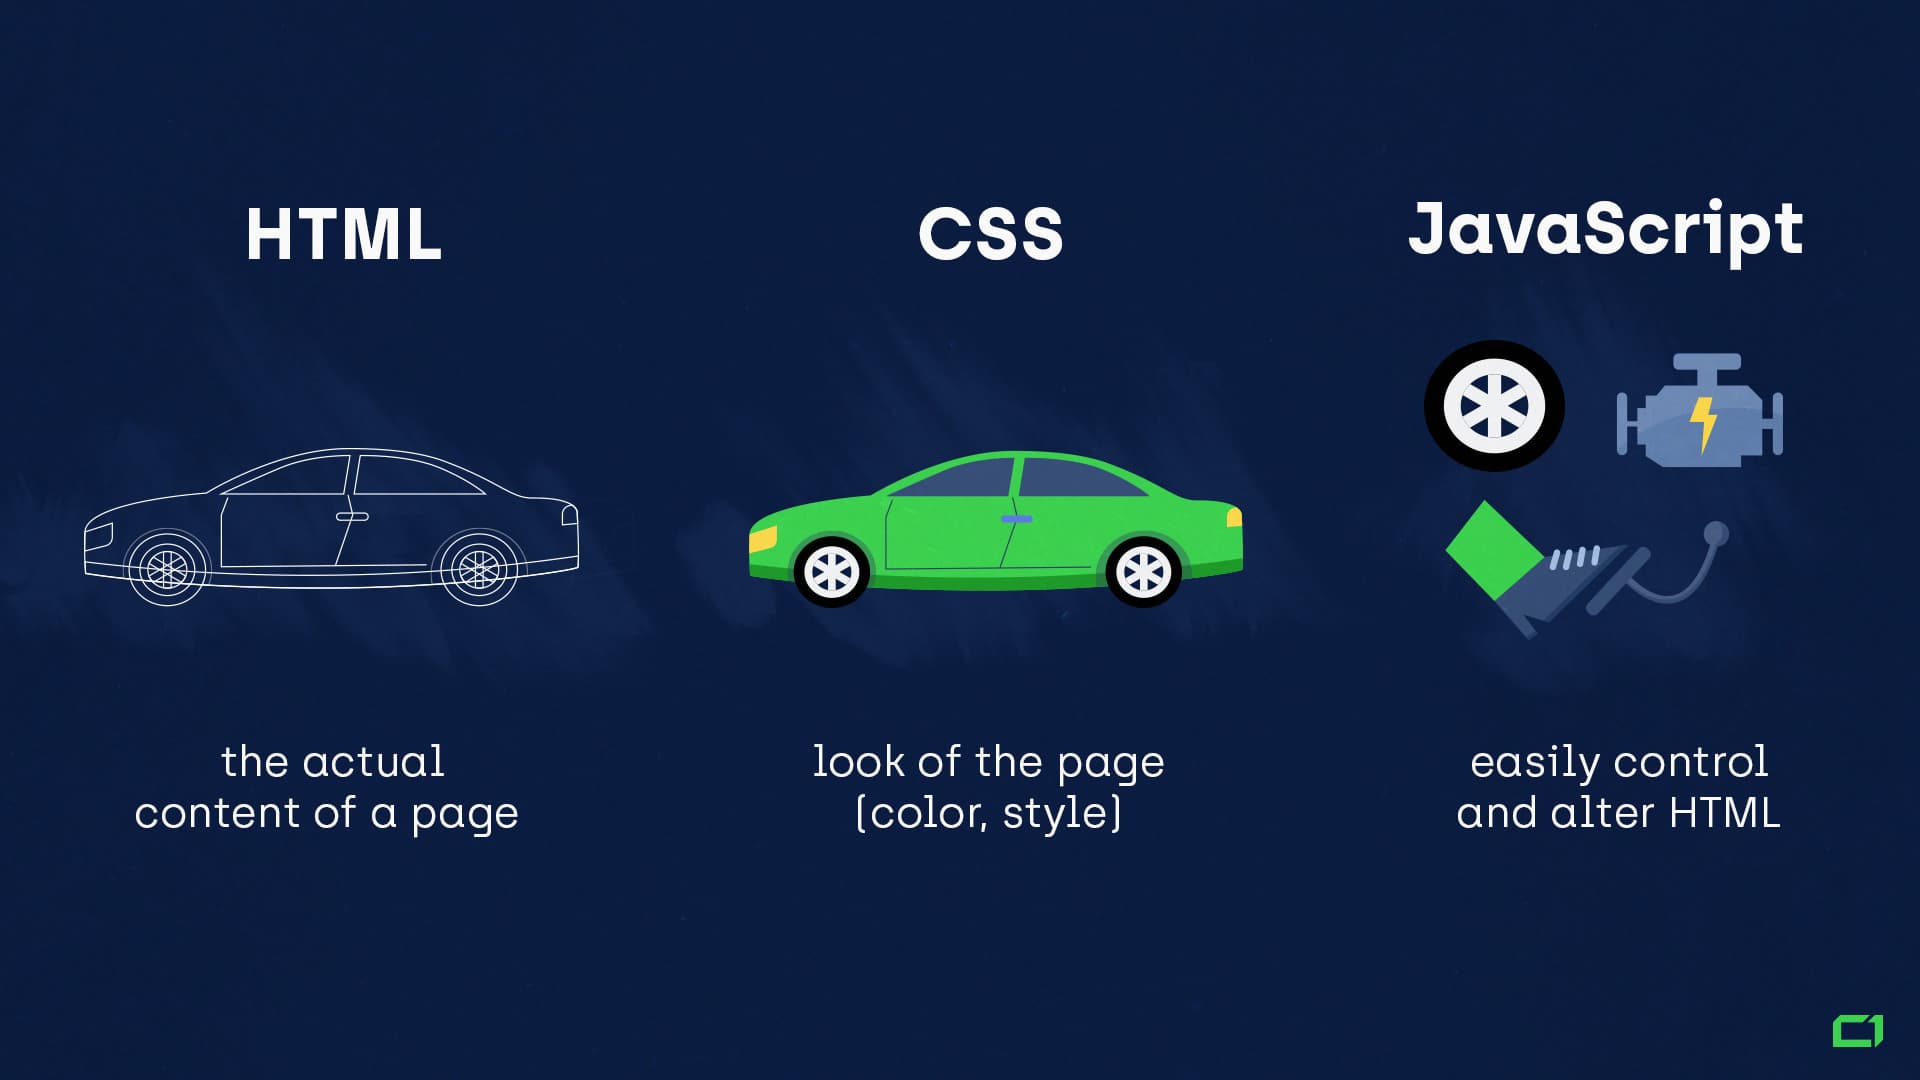 The differences between HTML, CSS and JavaScript: HTML is the actual contents of a page, CSS is responsible for the look of the page, and JavaScript controls and alters HTML